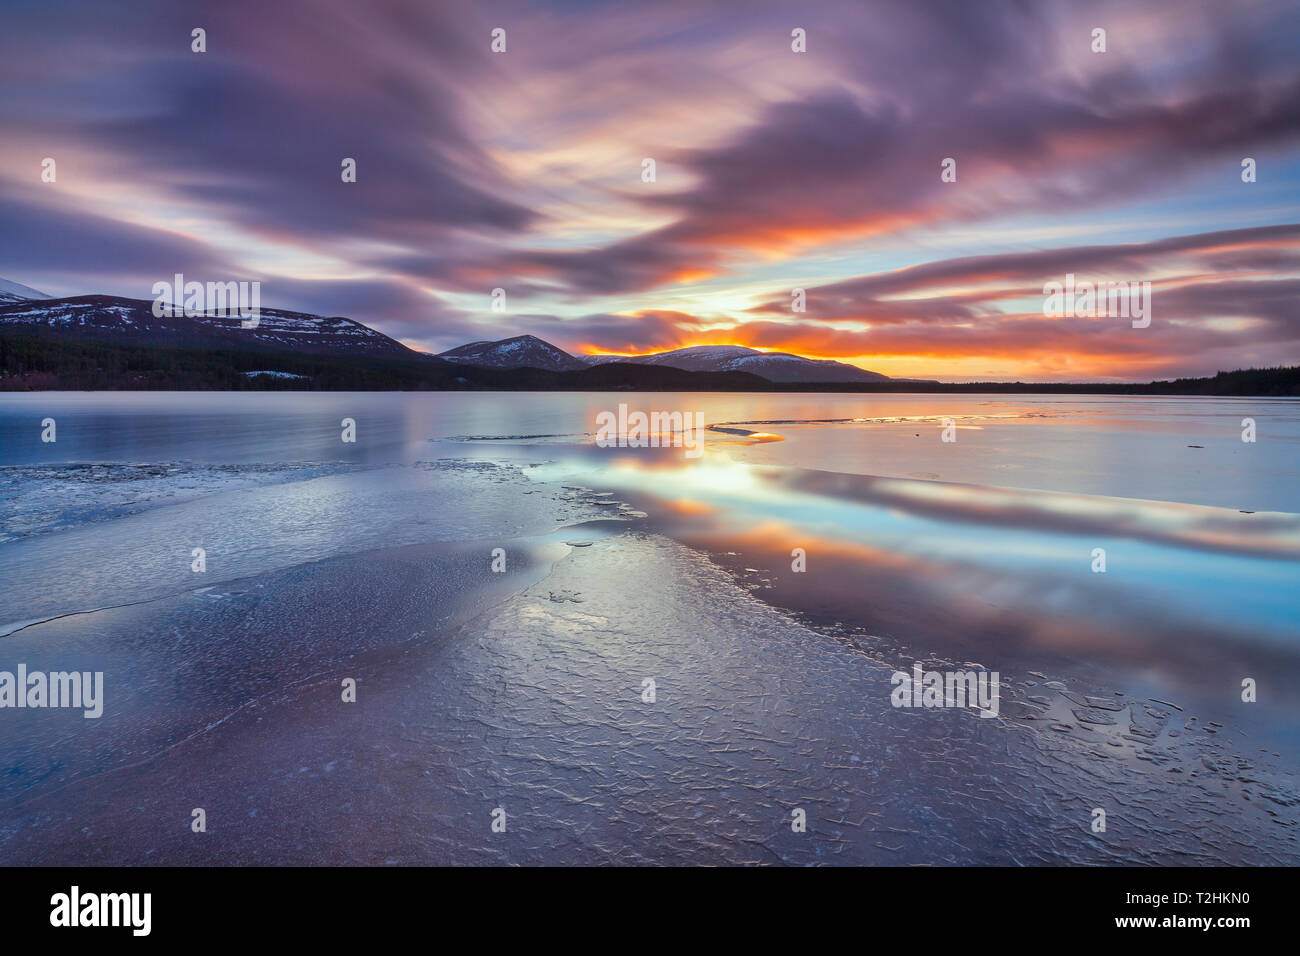 Ice sheets and sunset at Loch Morlich, Glenmore, Scotland, United Kingdom, Europe Stock Photo